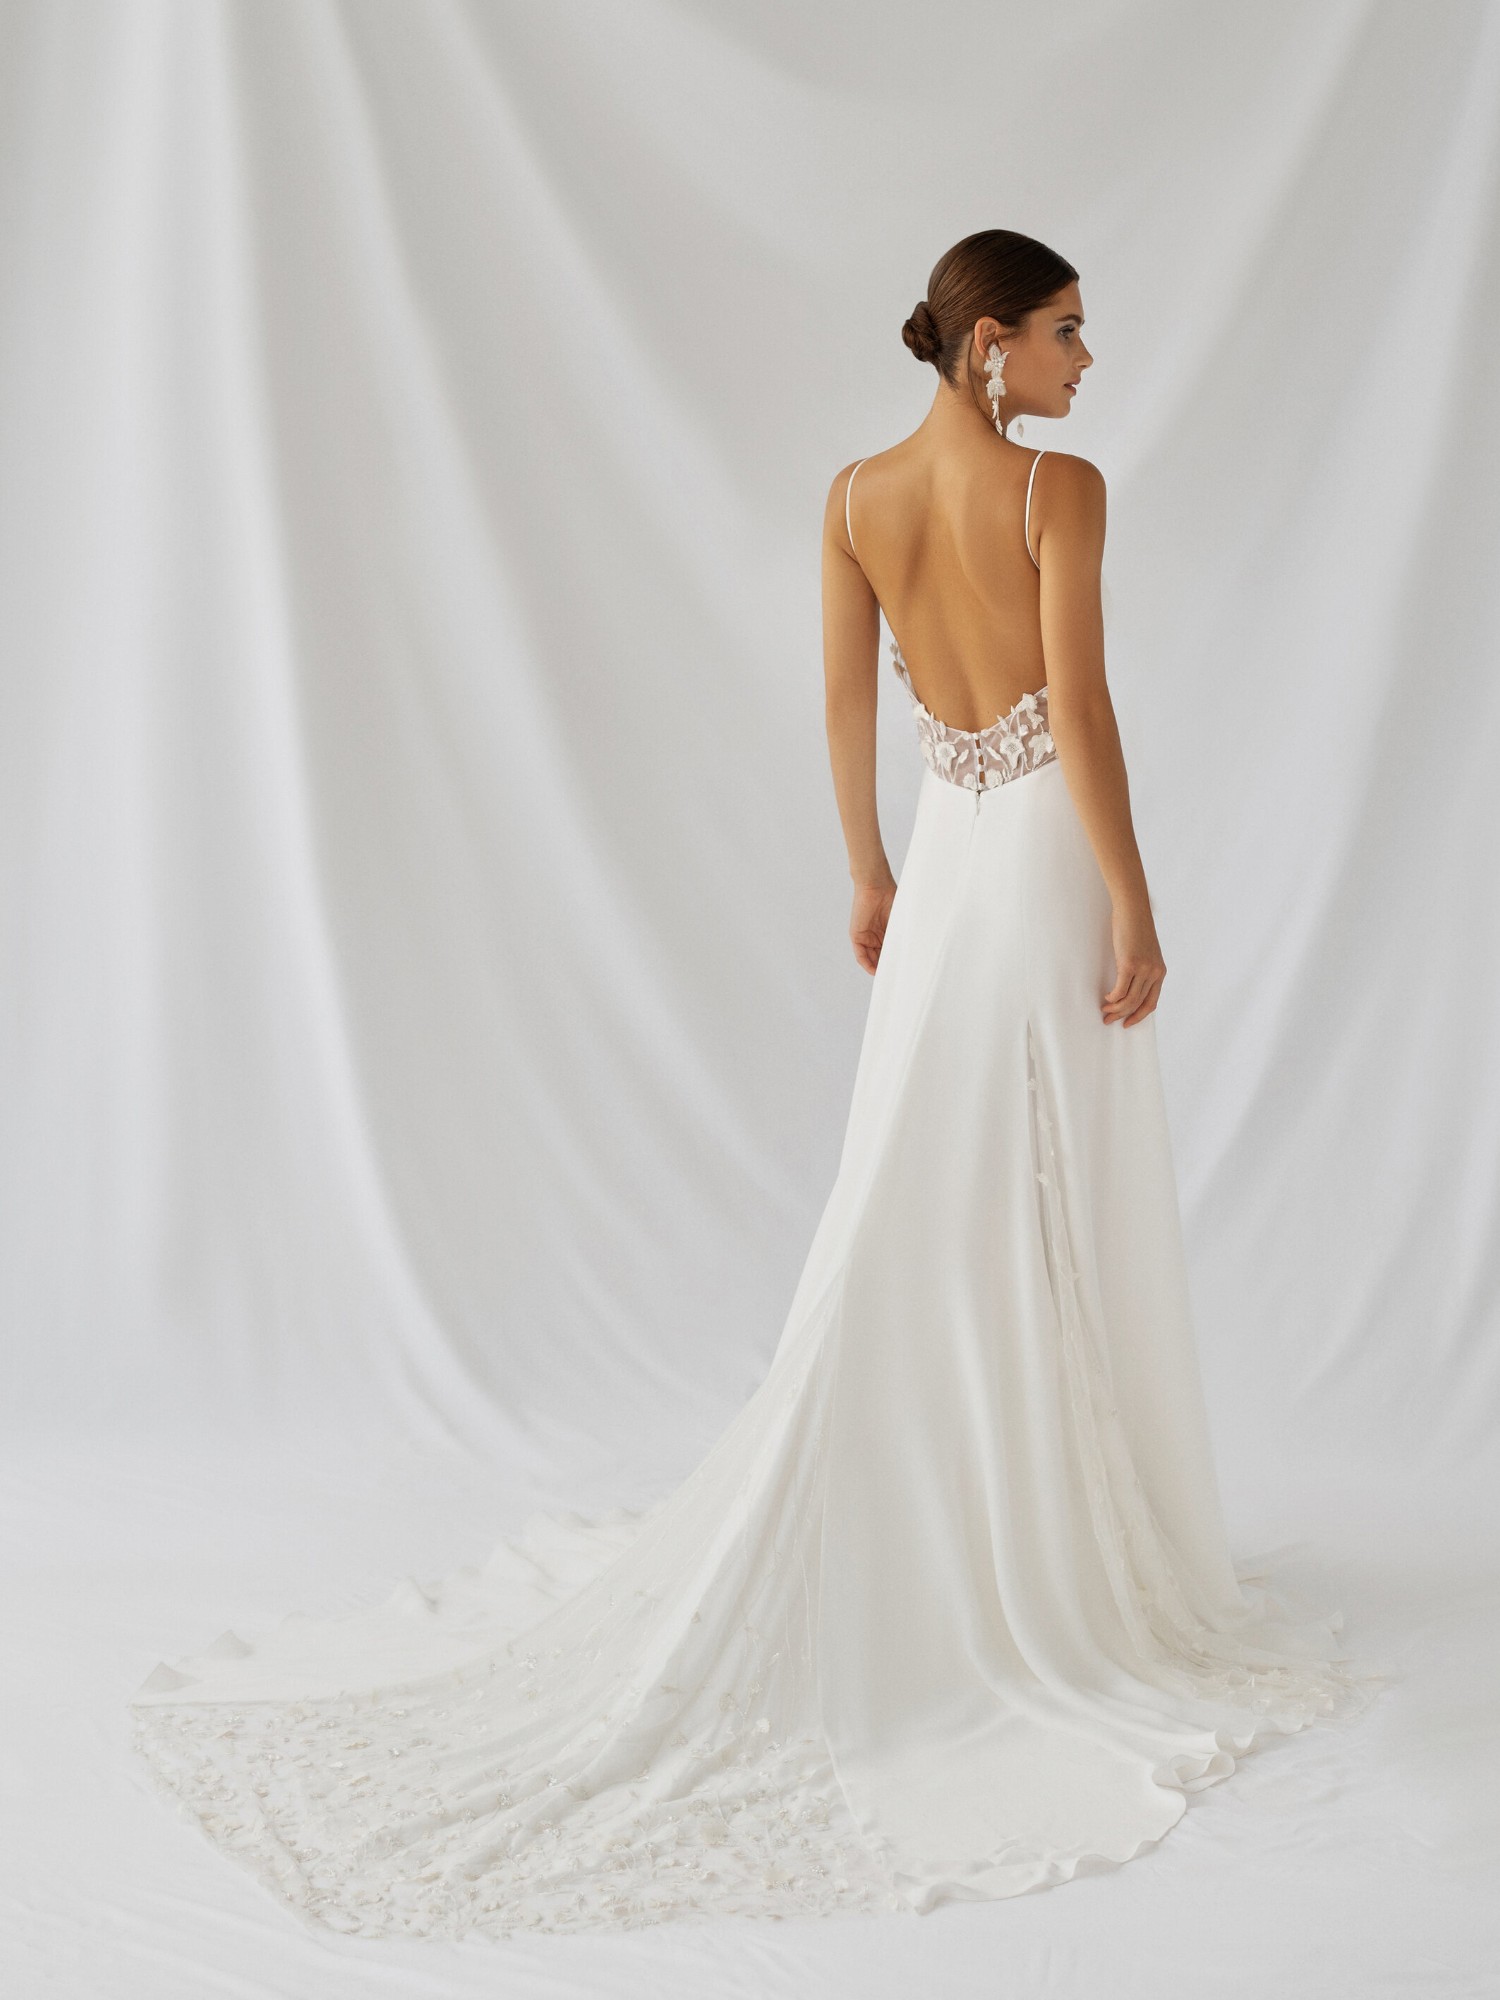 Fiorella Gown Inspirated By Botanica of Alexandra Grecco 2021 Bridal Collection